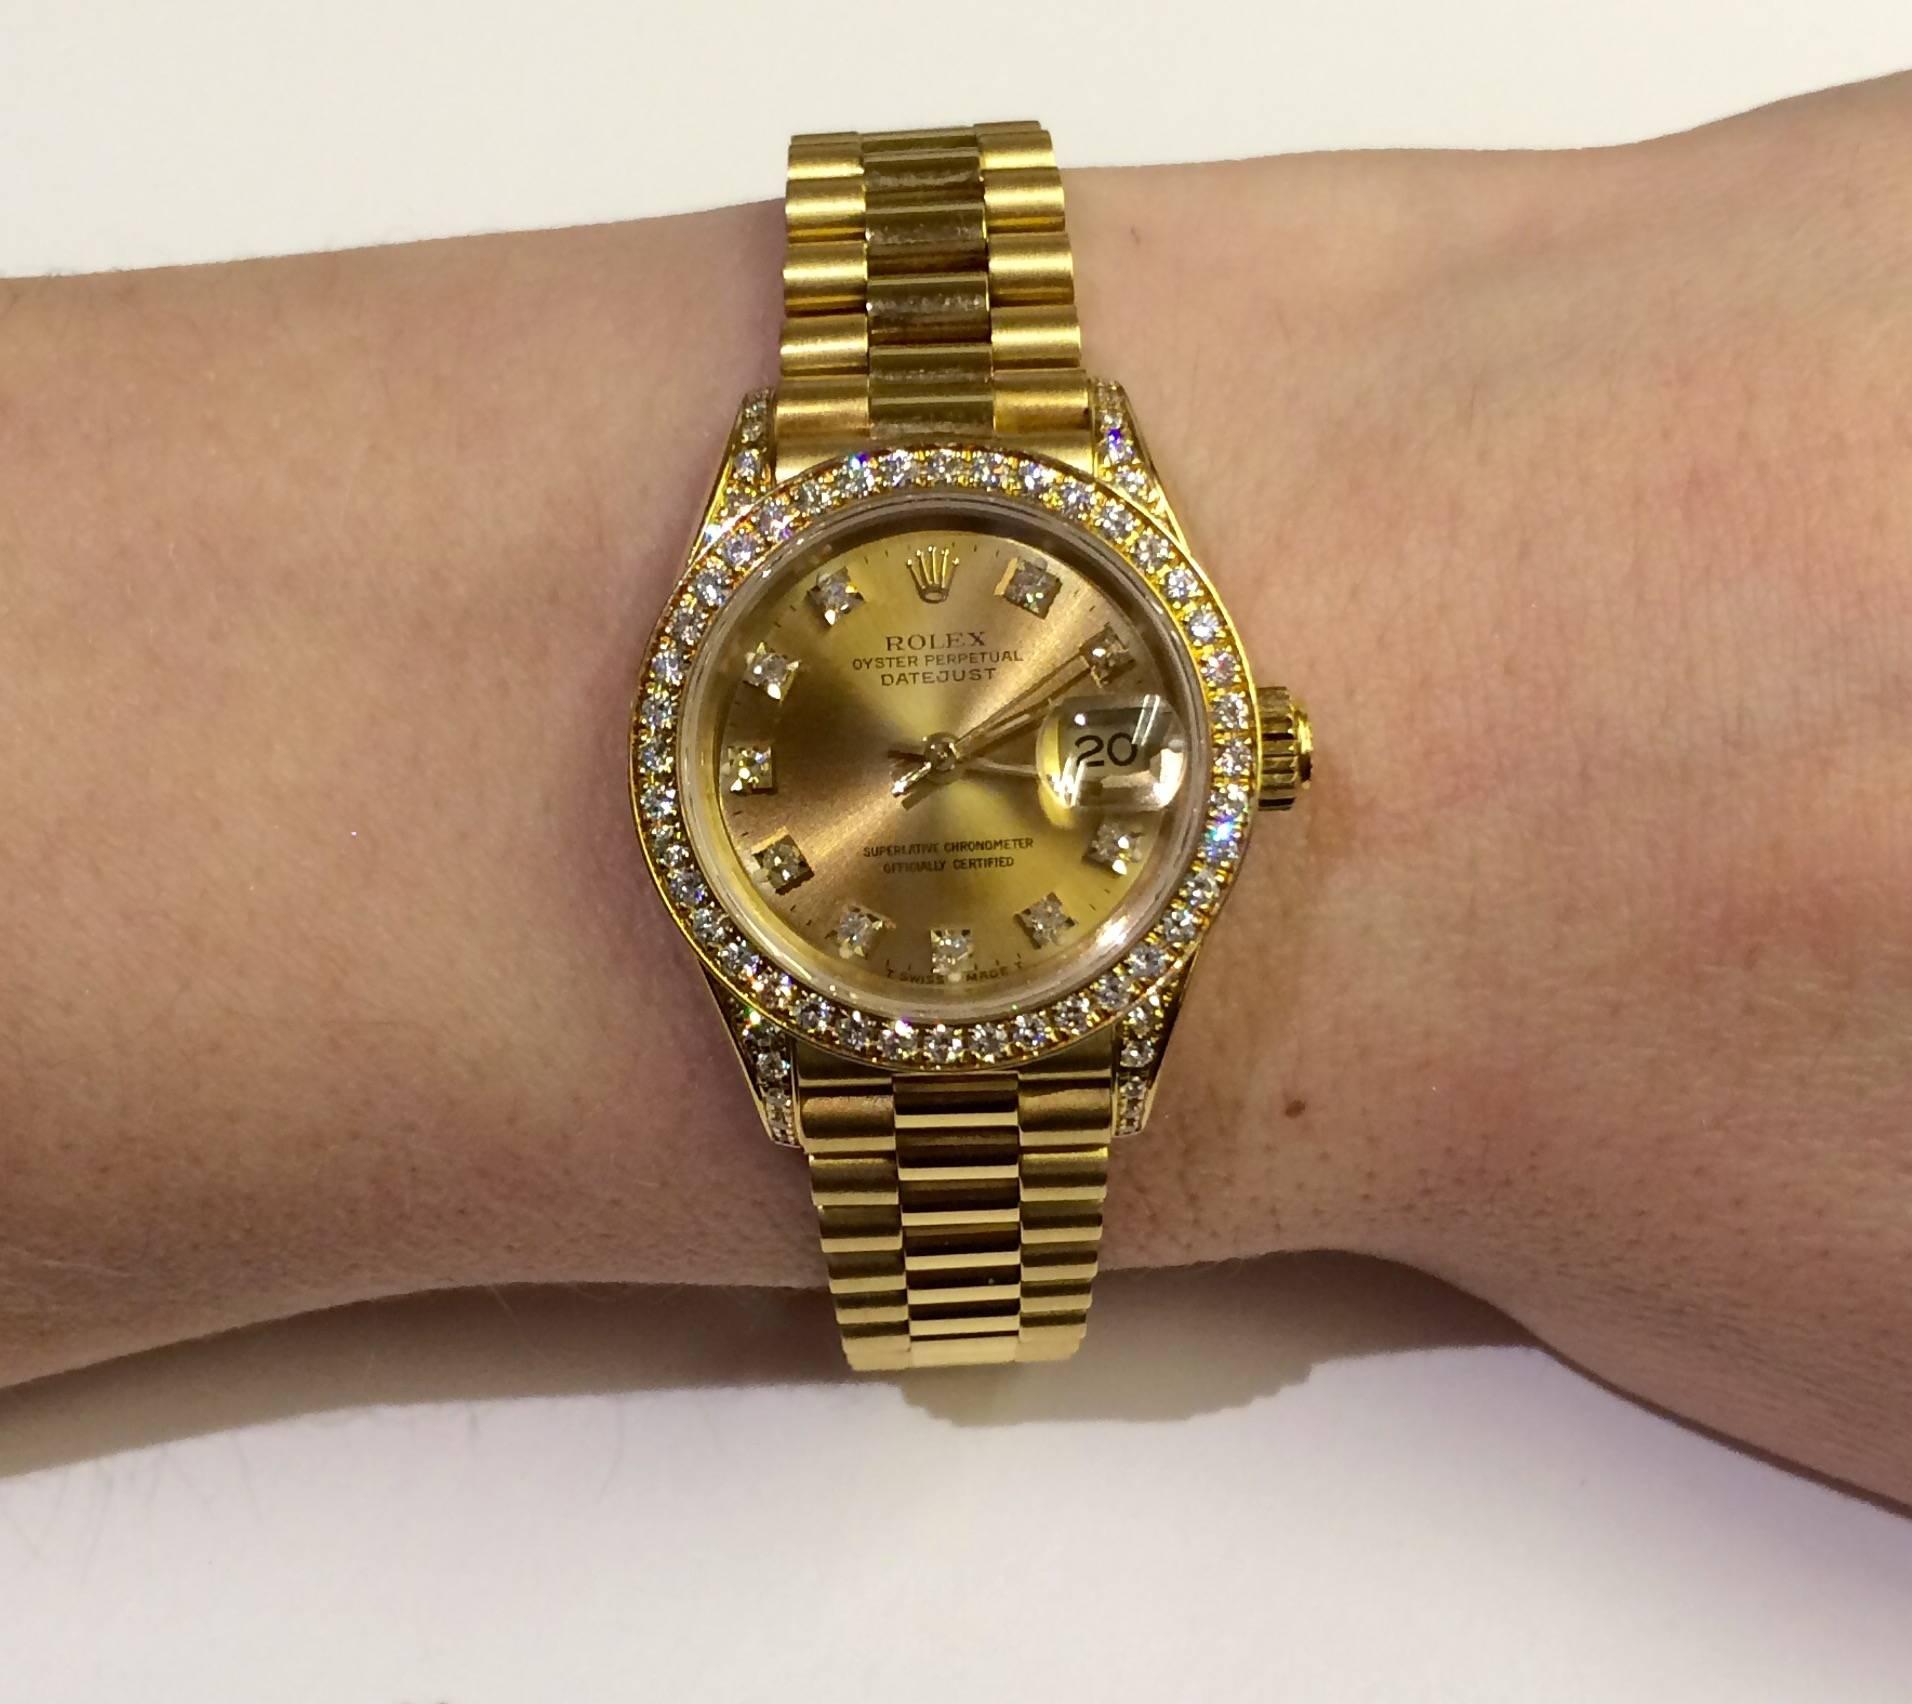 Lady's 18kt Yellow Gold Pre-Owned Rolex President w/ hidden-clasp watch.
24 diamonds on bezel, Automatic movement with date, Quickset date, scratch-resistant sapphire crystal, waterproof screw-down crown. Pre-owned. Model #69158,  Serial #  X577857